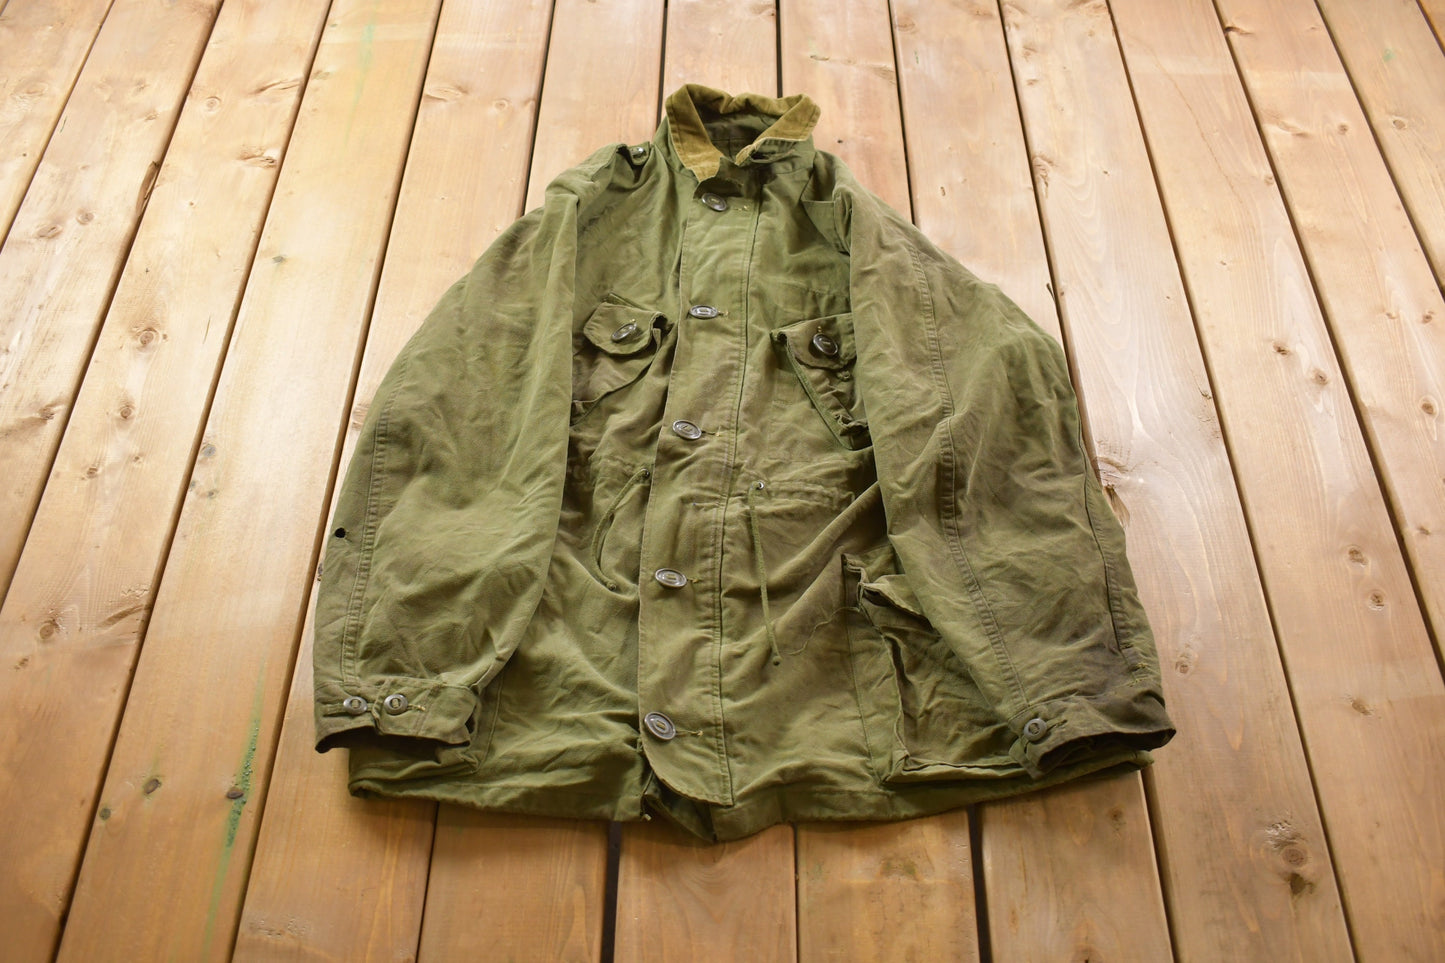 Vintage 1995 Military Heavyweight Combat Coat Coat / Button Up Jacket / Canadian Army Green / Vintage Army / Army Jacket